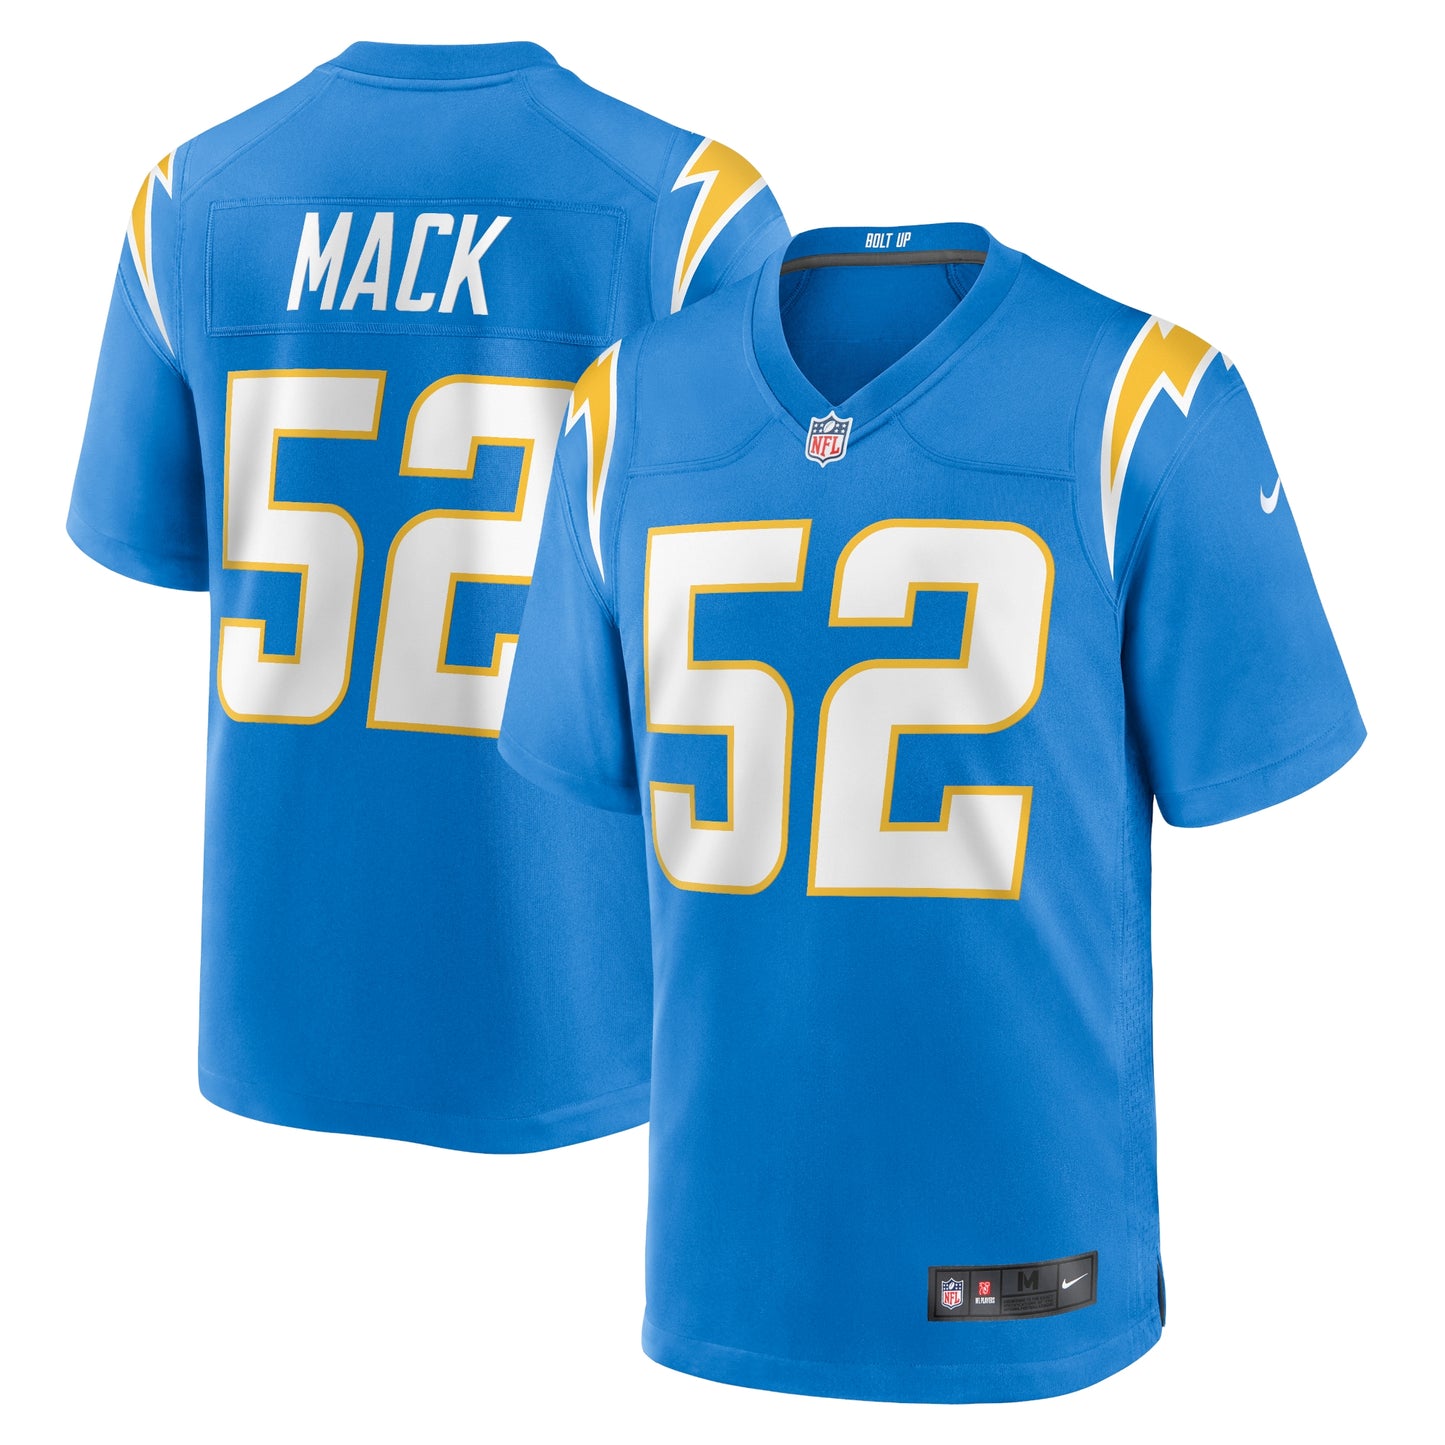 Khalil Mack Los Angeles Chargers Nike Game Jersey - Powder Blue